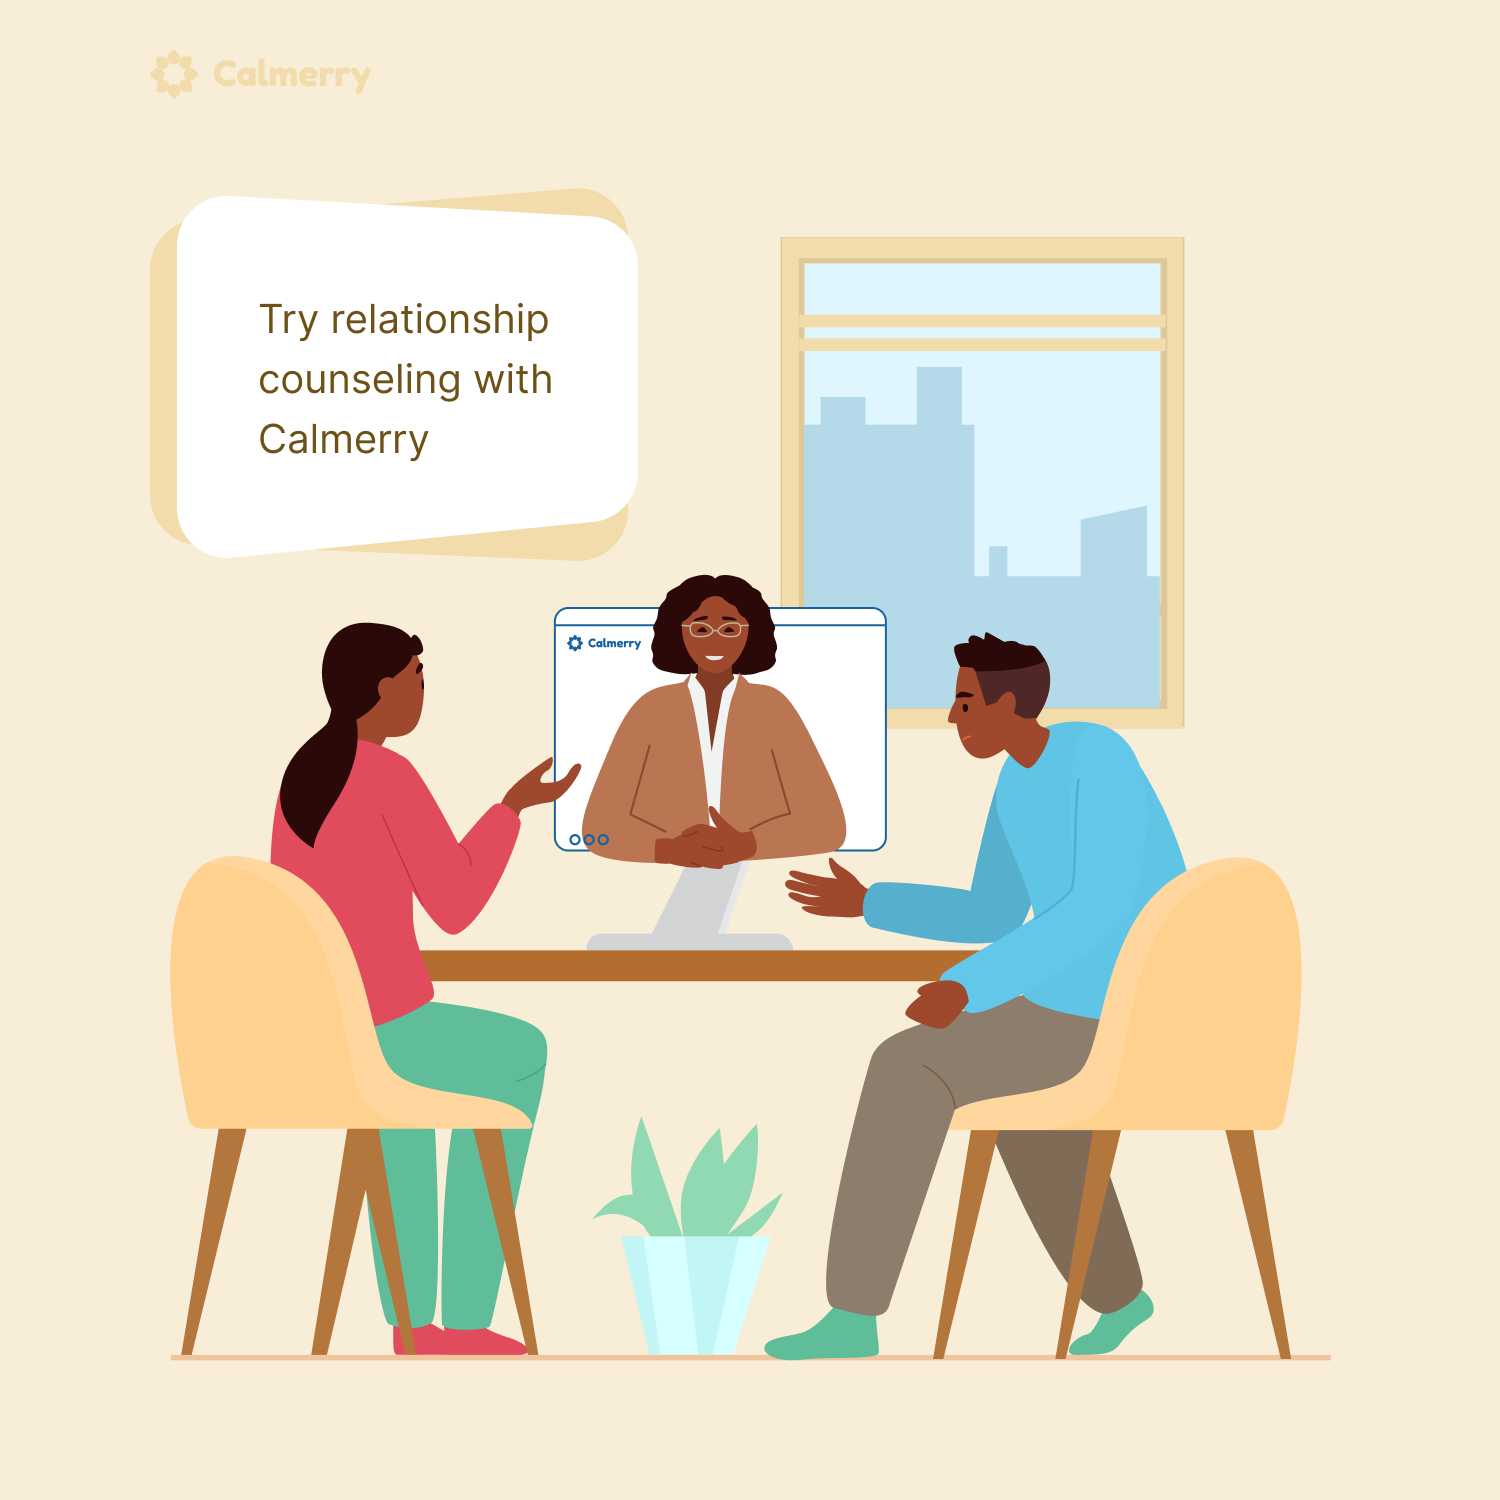 Try relationship counseling with Calmerry